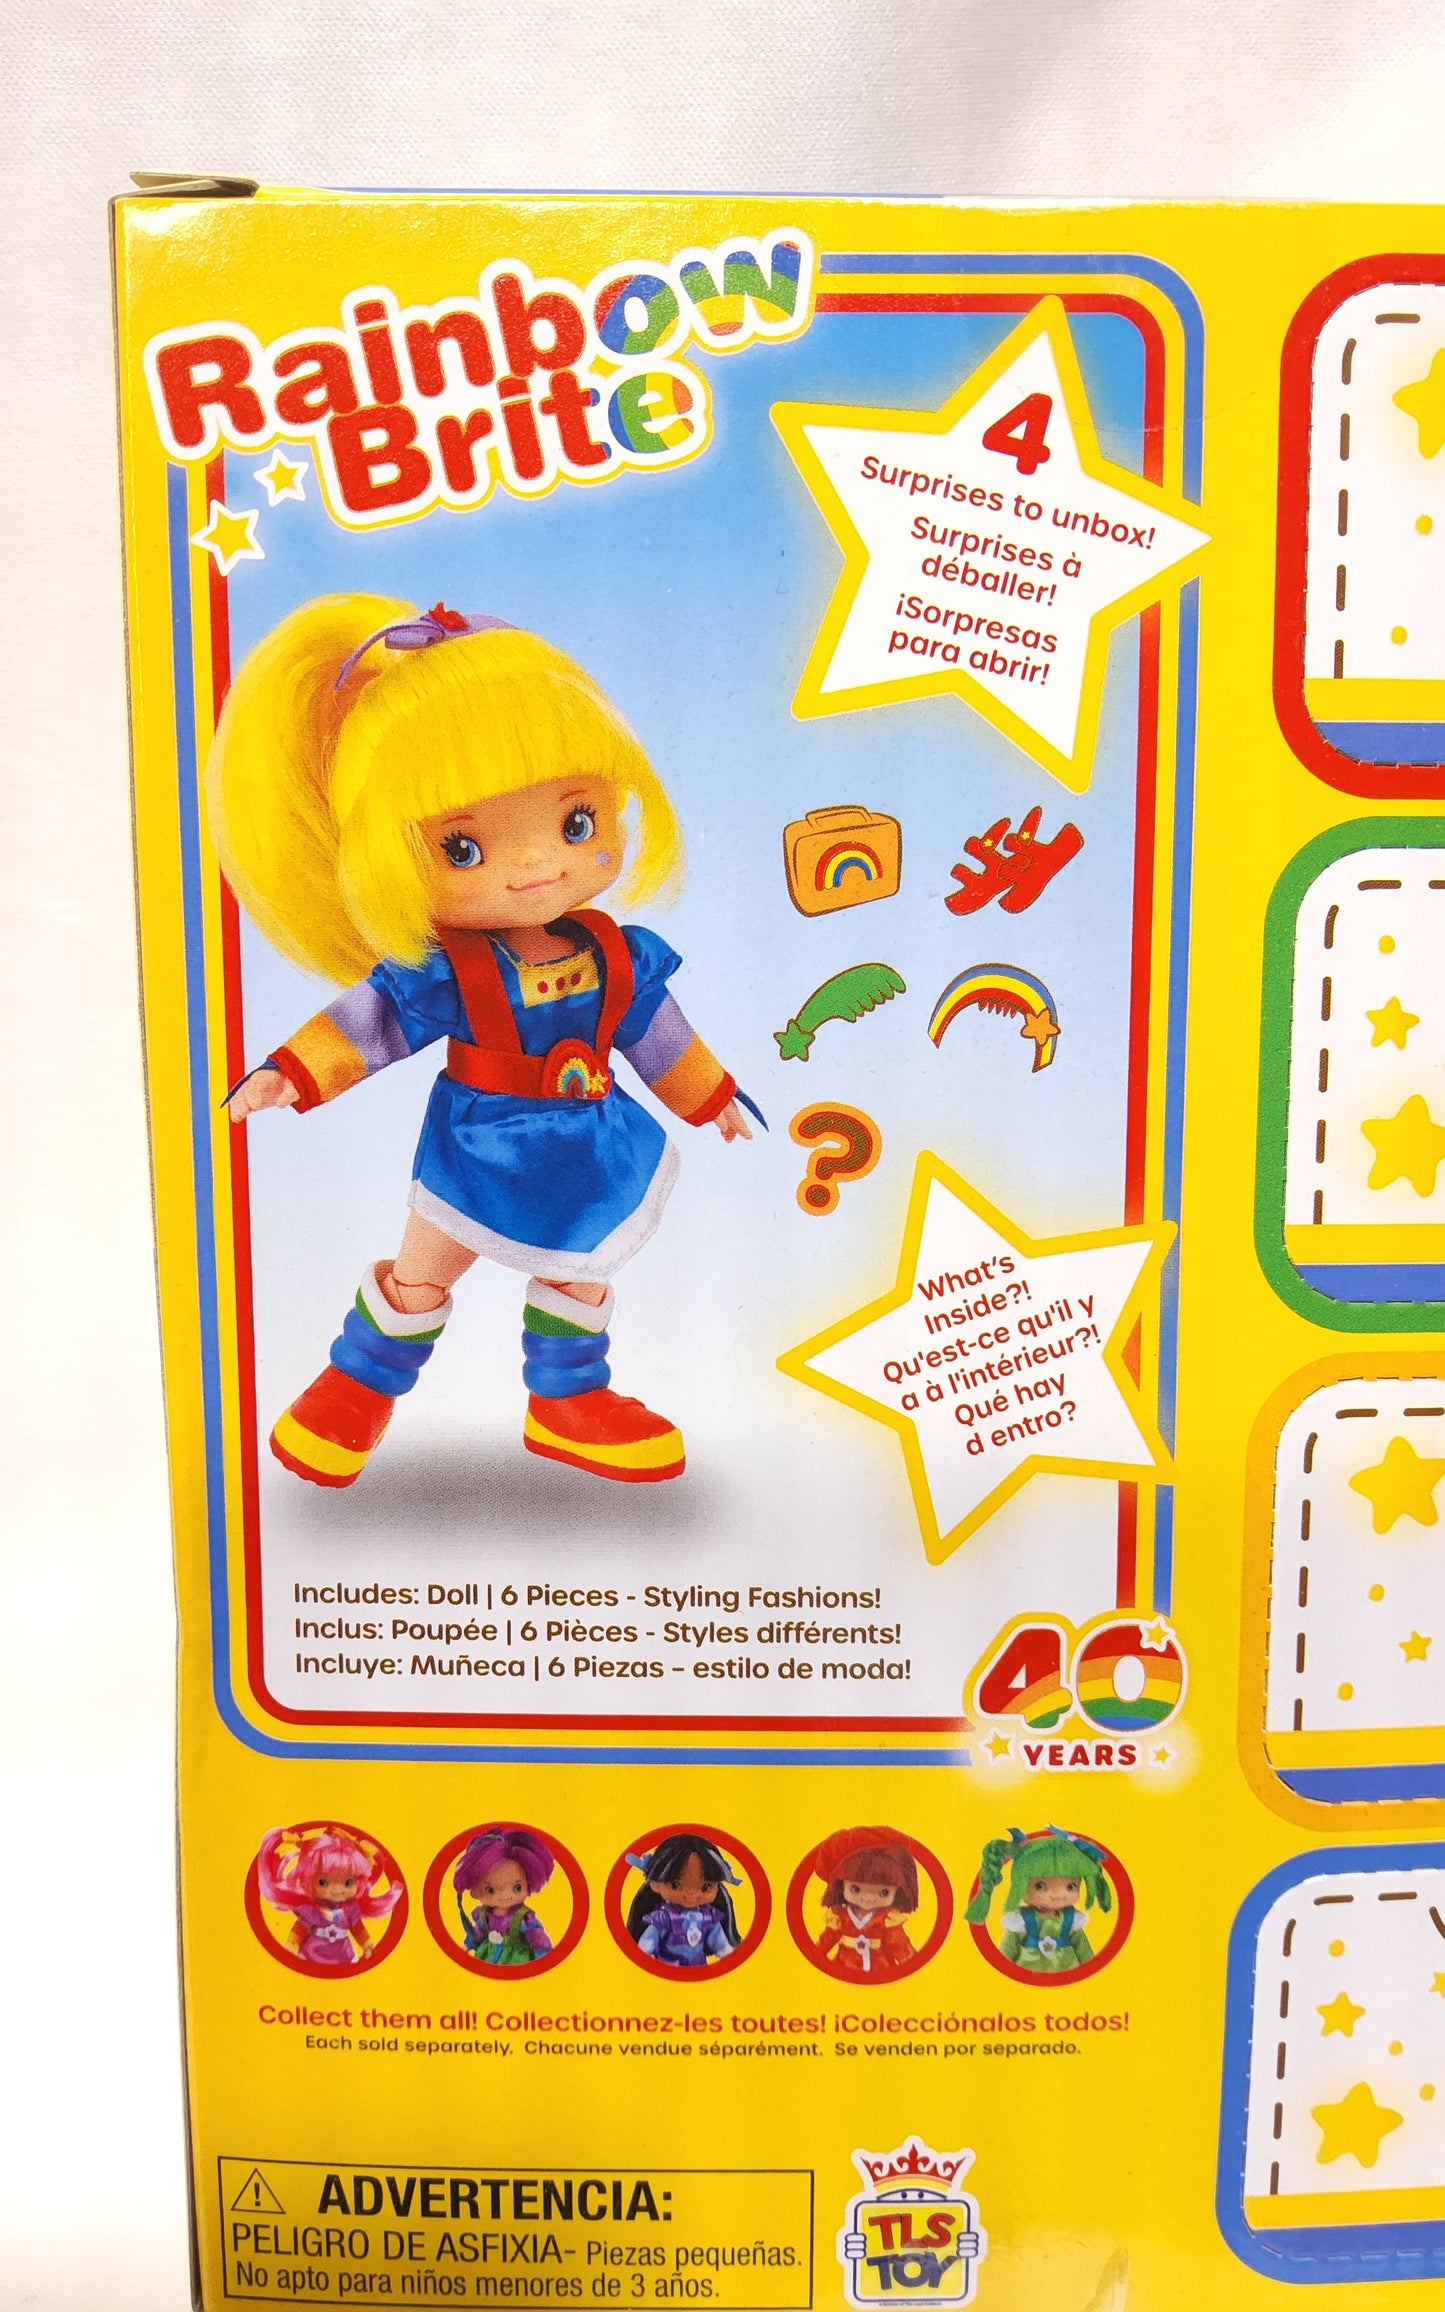 Rainbow Brite 5.5" Figure with Accessories by The Loyal Subjects